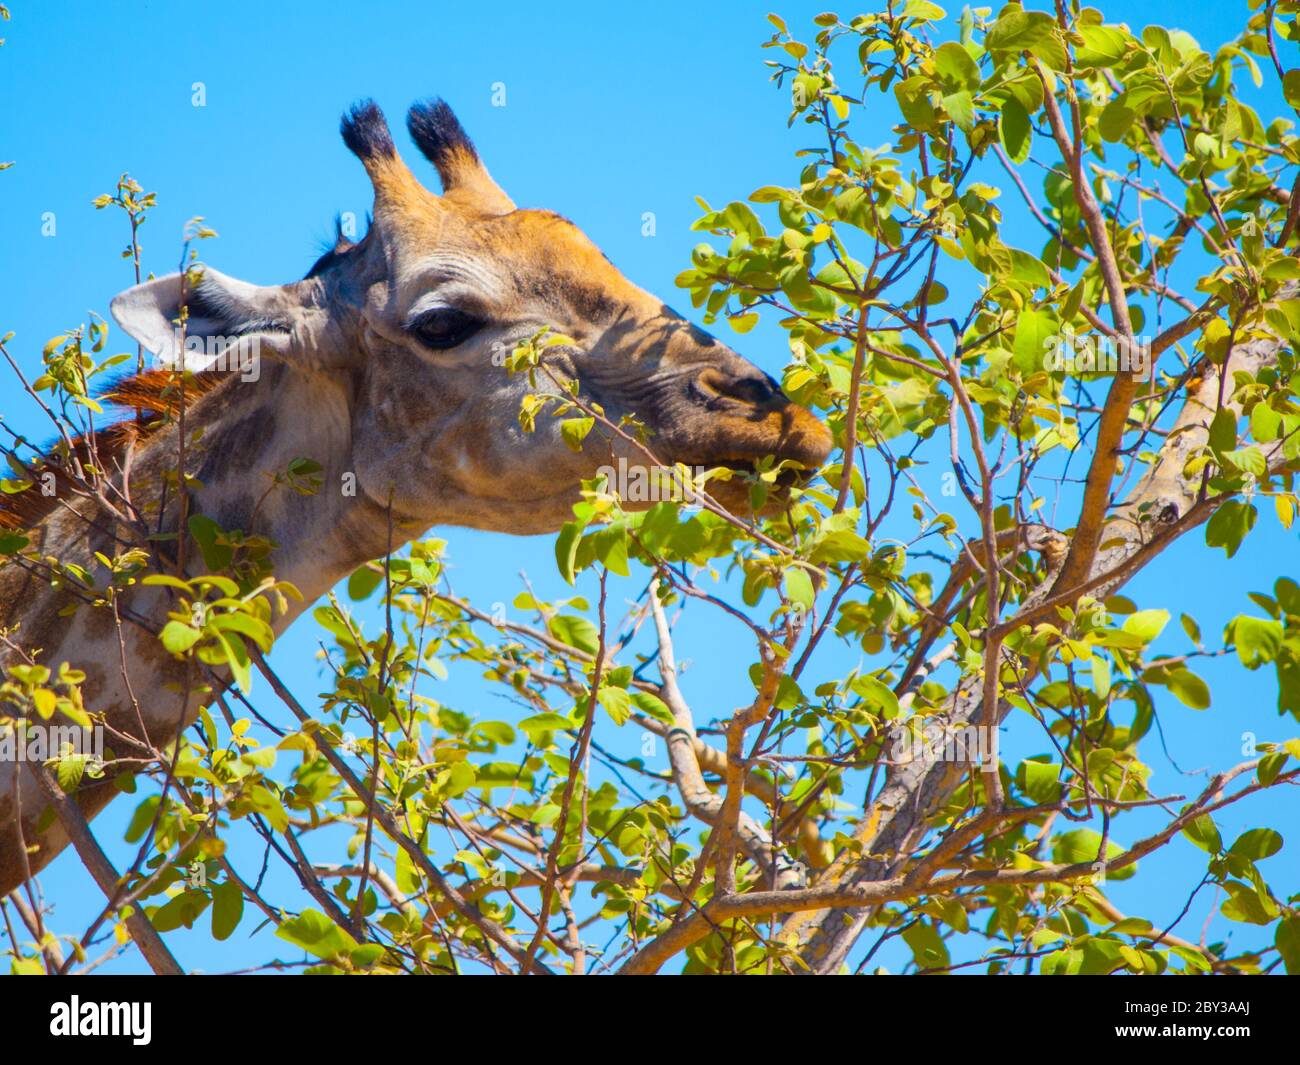 Dateiled portrait of giraffe eating leafs from the tree with blue sky background Stock Photo